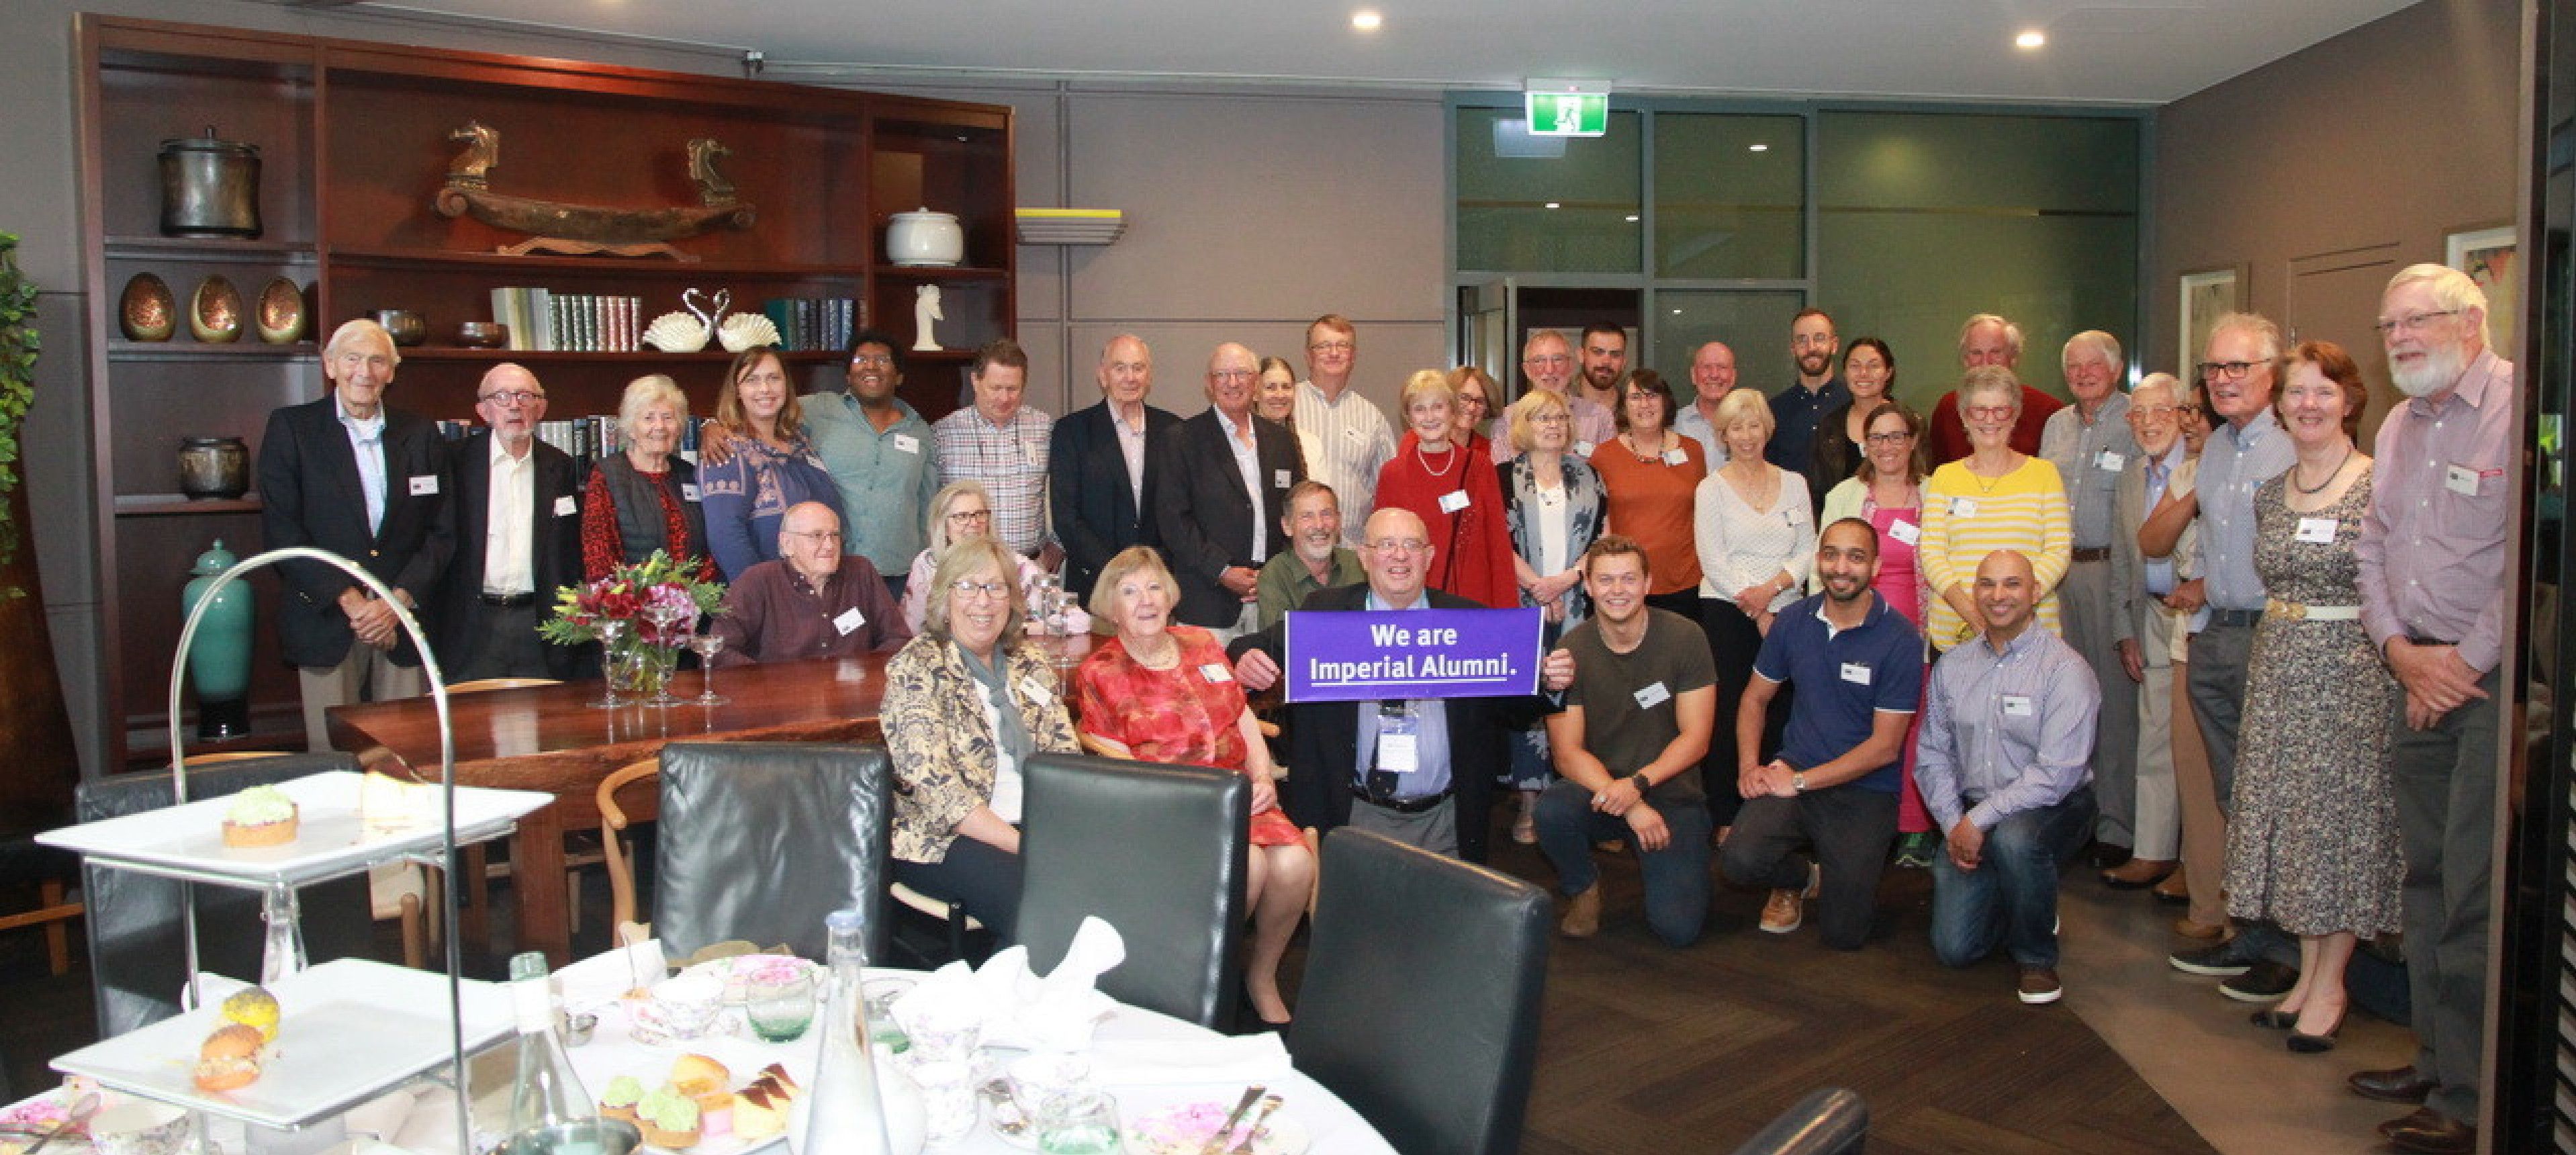 High Tea hosted by the Imperial College Alumni Association of Western Australia